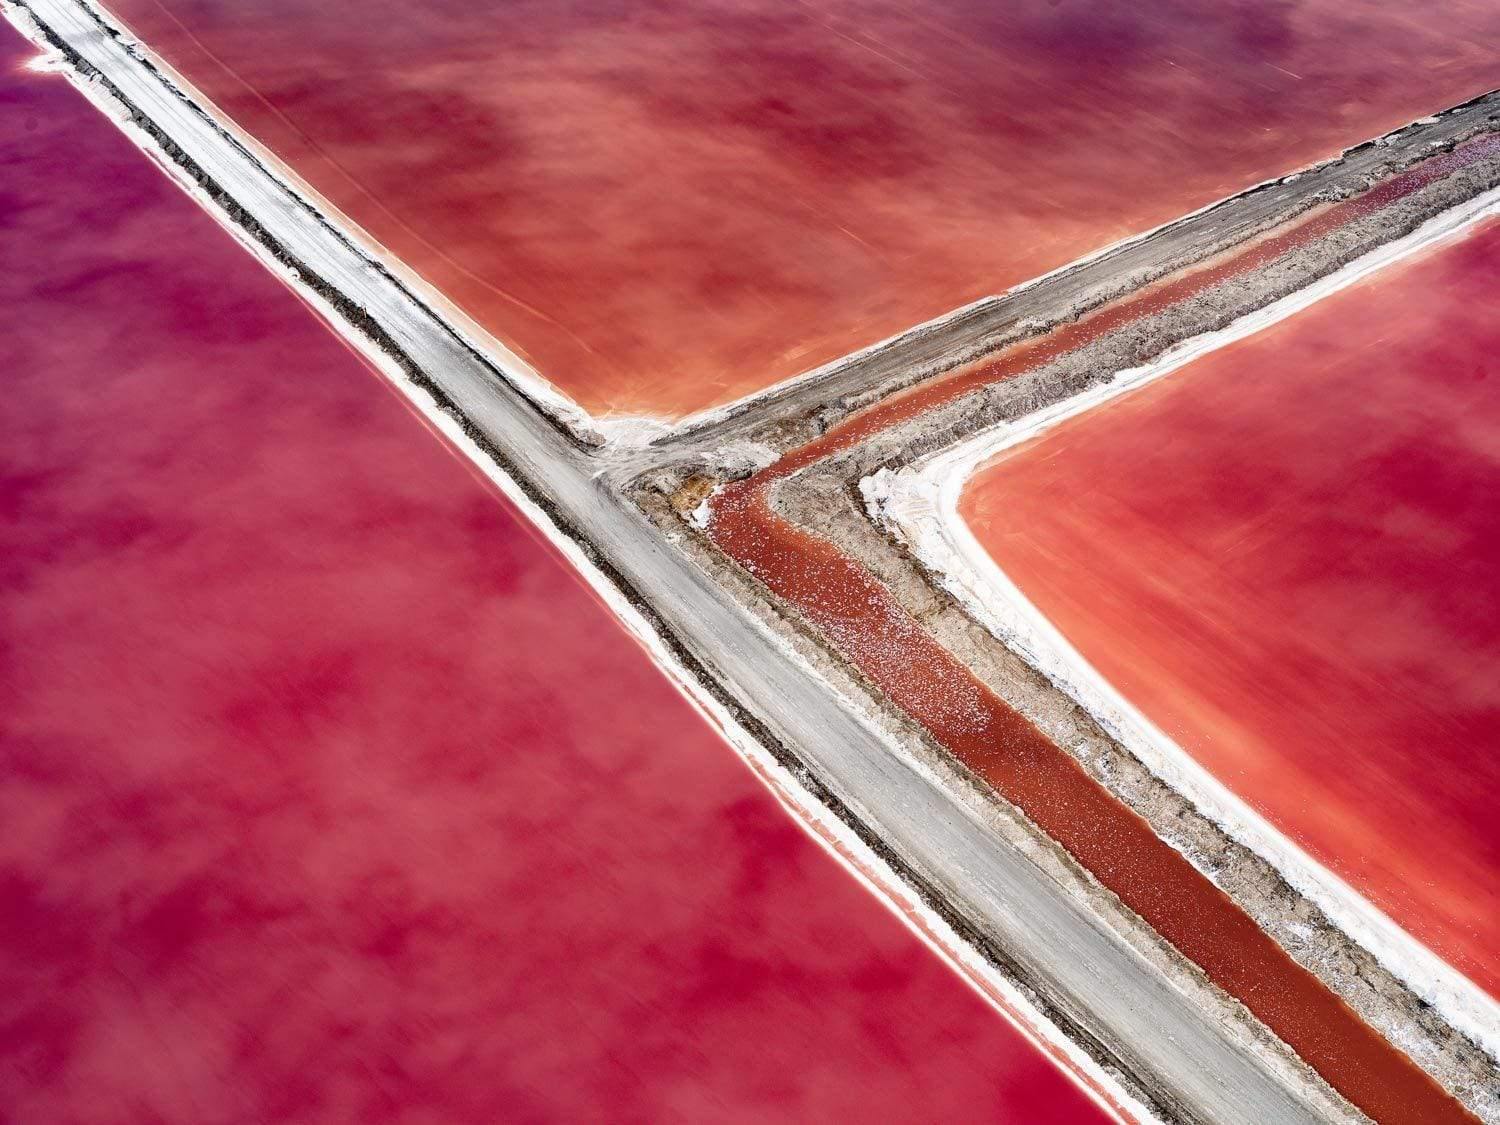 Aerial view of the separation of red oceans, Shades of Red